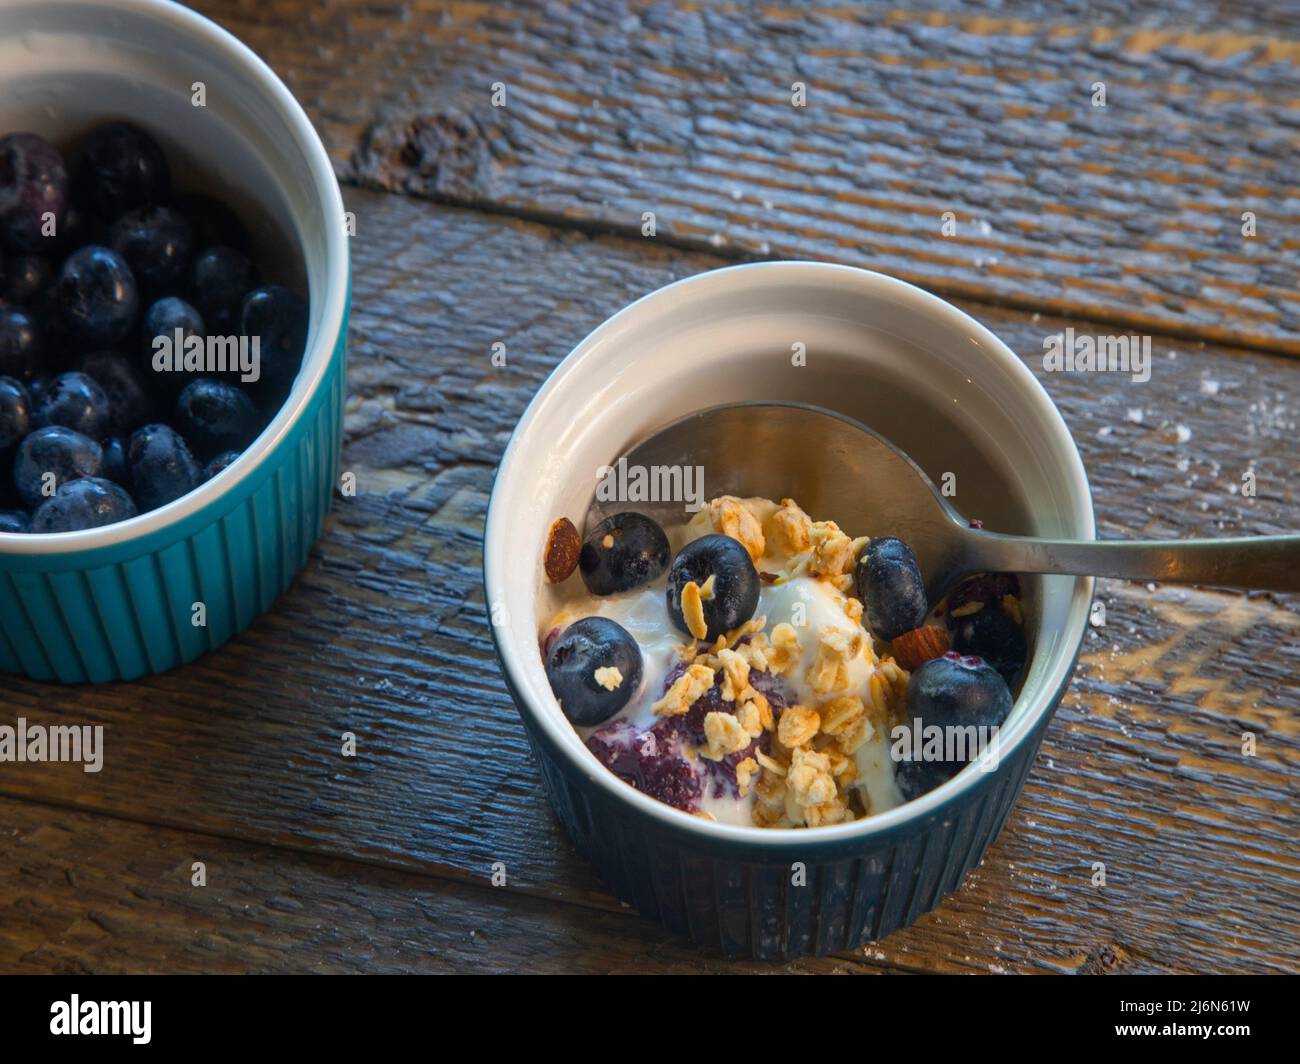 Top view of blueberry ice cream granola dish on natural wood table. Stock Photo